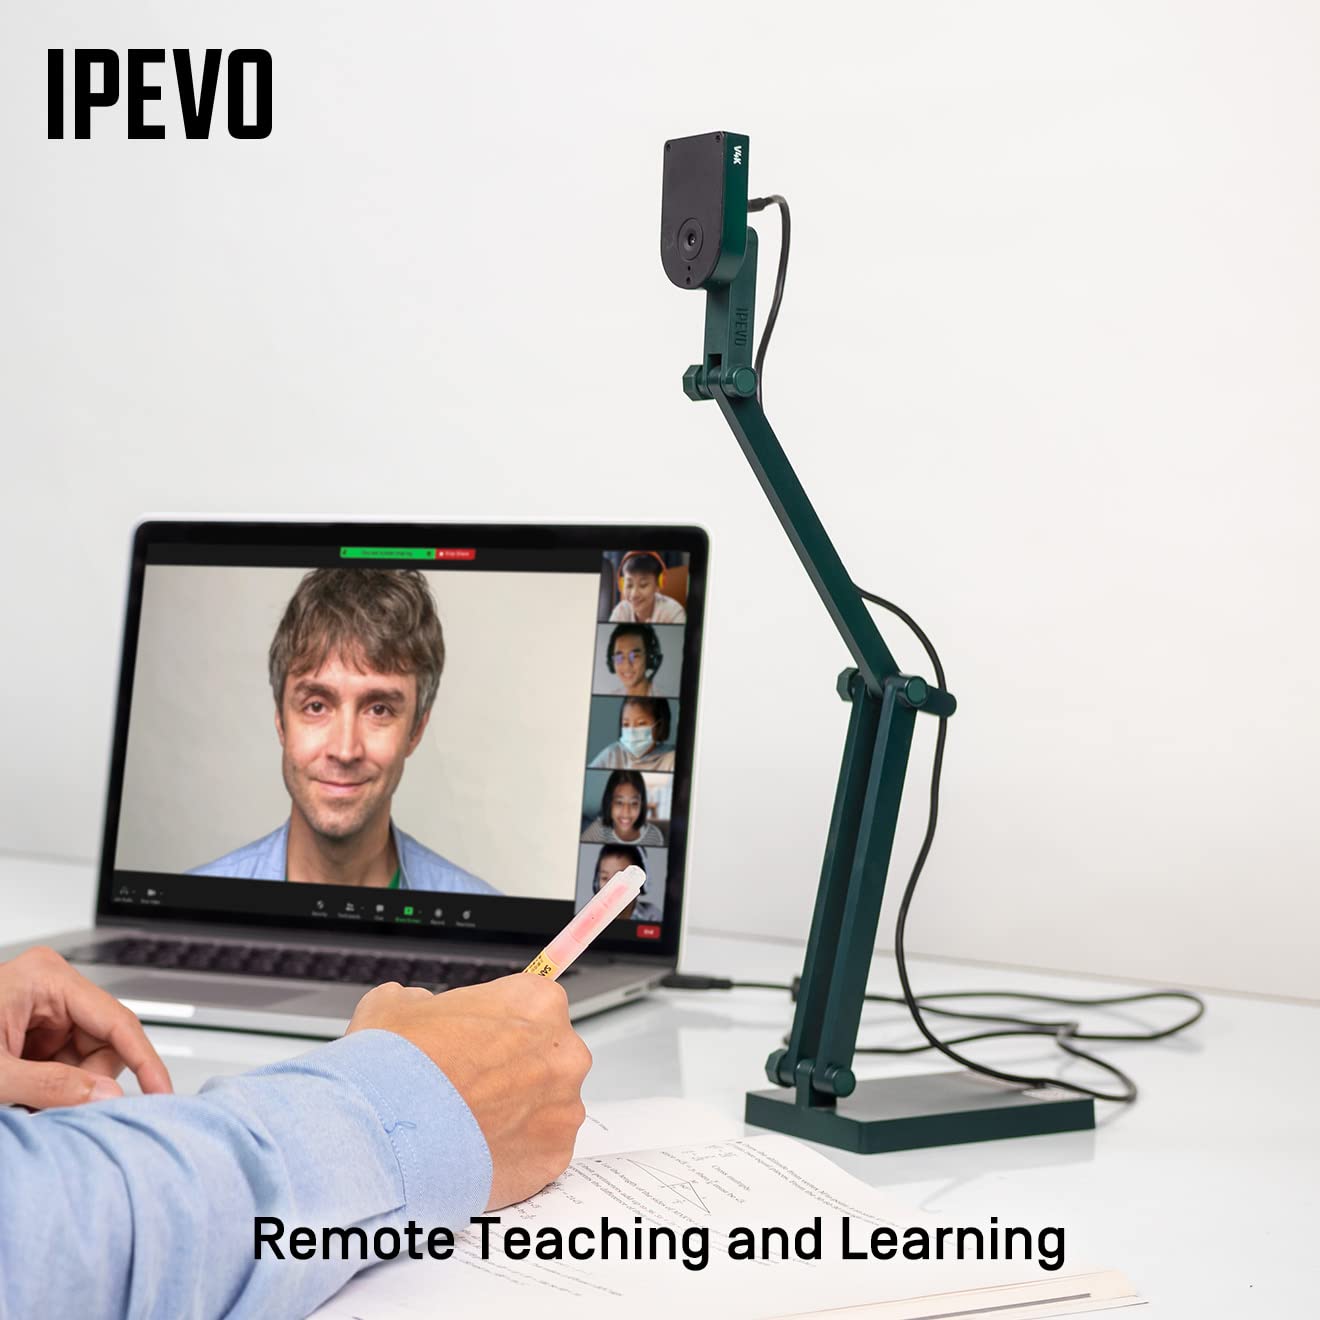 IPEVO V4K Ultra High Definition 8MP USB Document Camera — Mac OS, Windows, Chromebook Compatible for Live Demo, Web Conferencing, Distance Learning, Remote Teaching